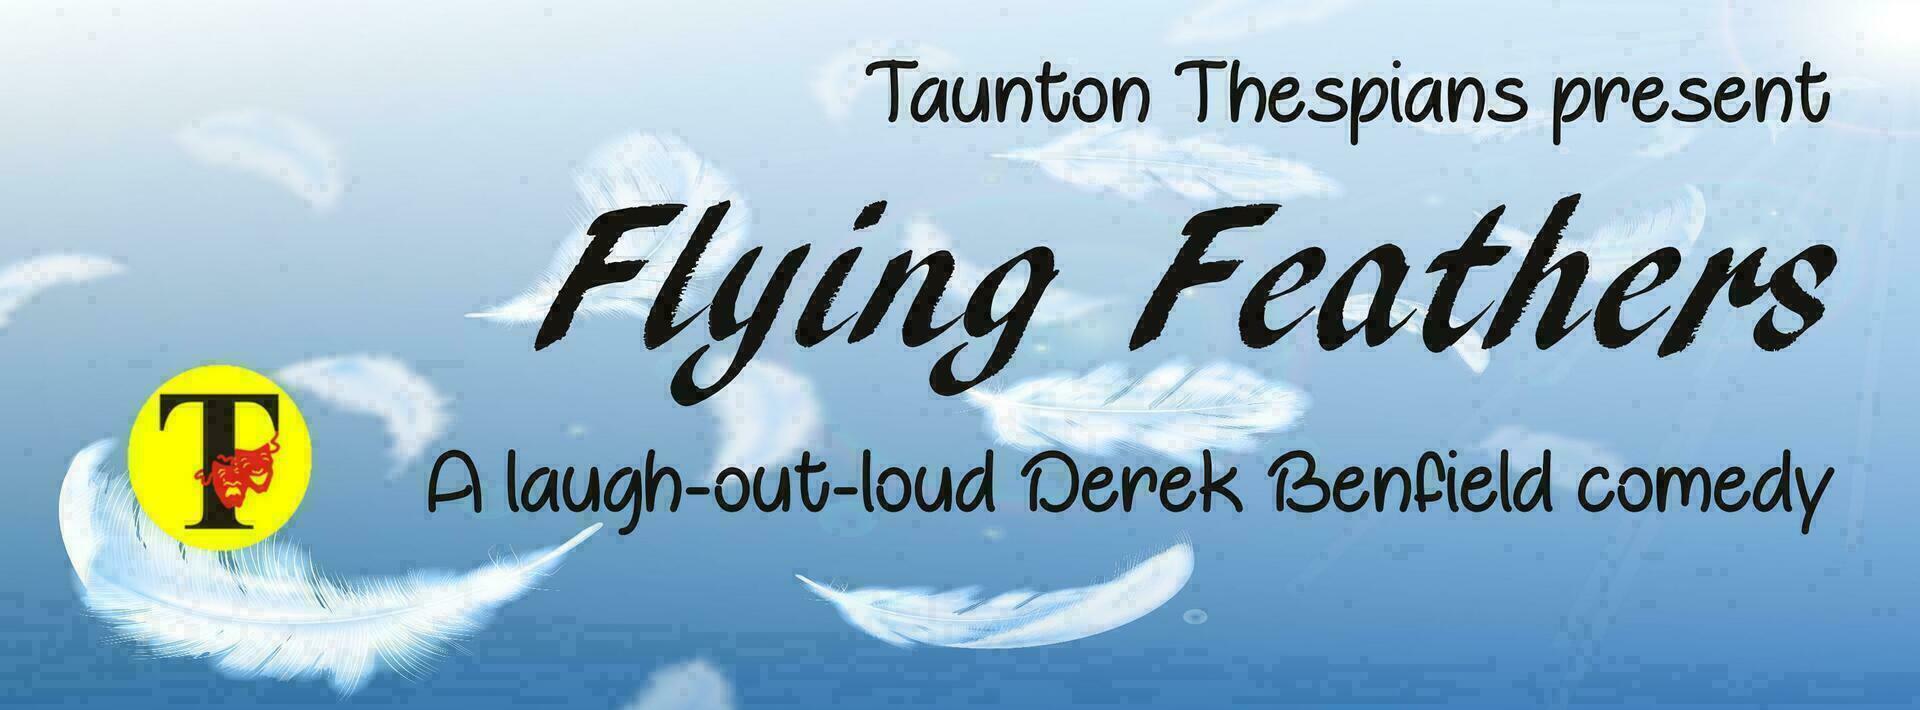 Taunton Thespians present Derek Benfield's laugh out loud comedy "Flying Feathers"